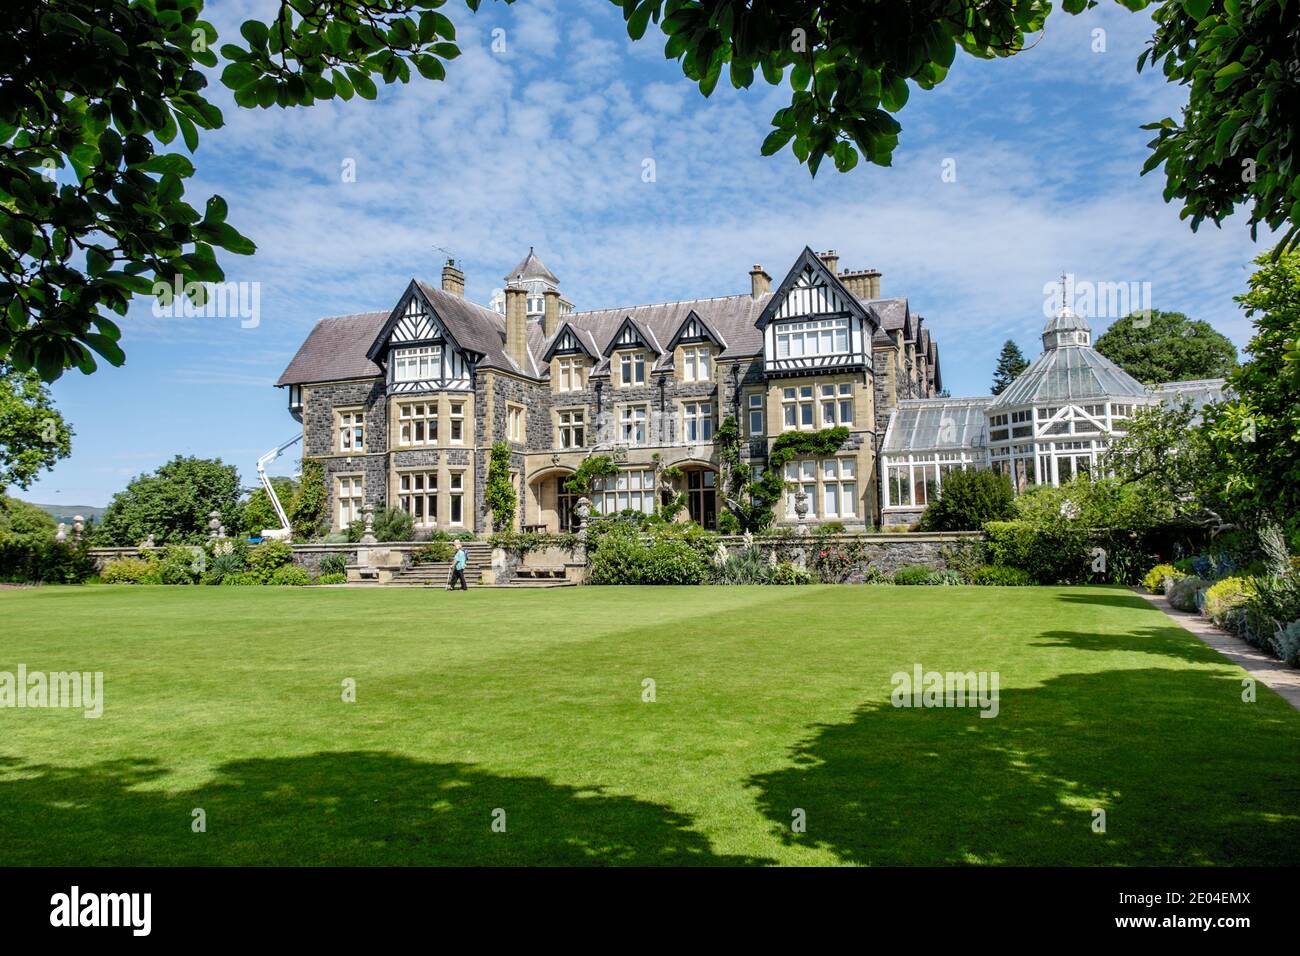 Bodnant Hall at Bodnant Garden, situated overlooking the Conwy Valley, Wales, UK. Stock Photo